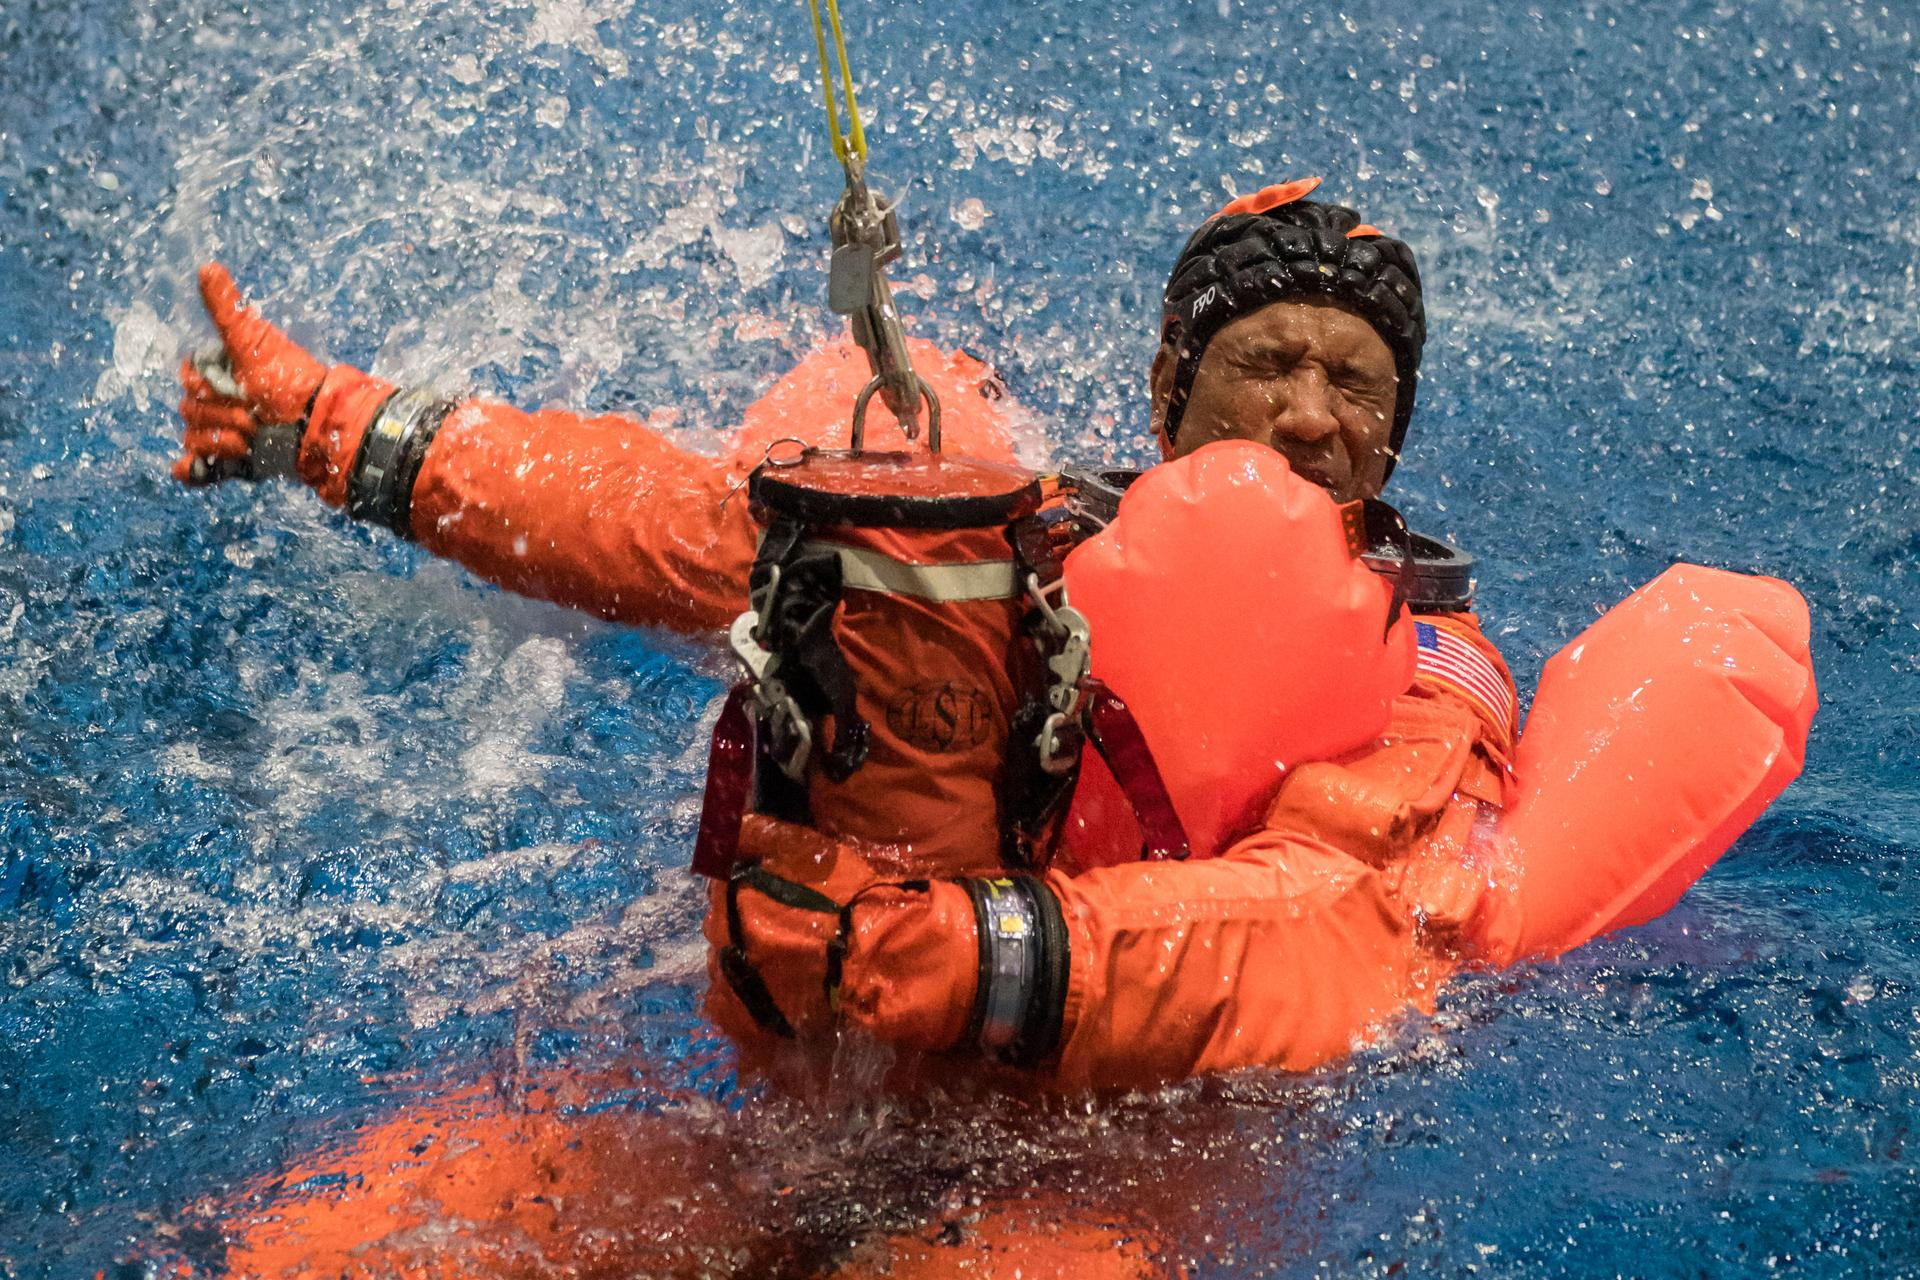 A man wearing a bright orange spacesuit and a bike helmet floats with on arm wrapped holding an orange sack, wrapped around an orange inflatable. He is half submerged in vibrant blue water, splashing his orange hand from the wet to give a thumbs up.